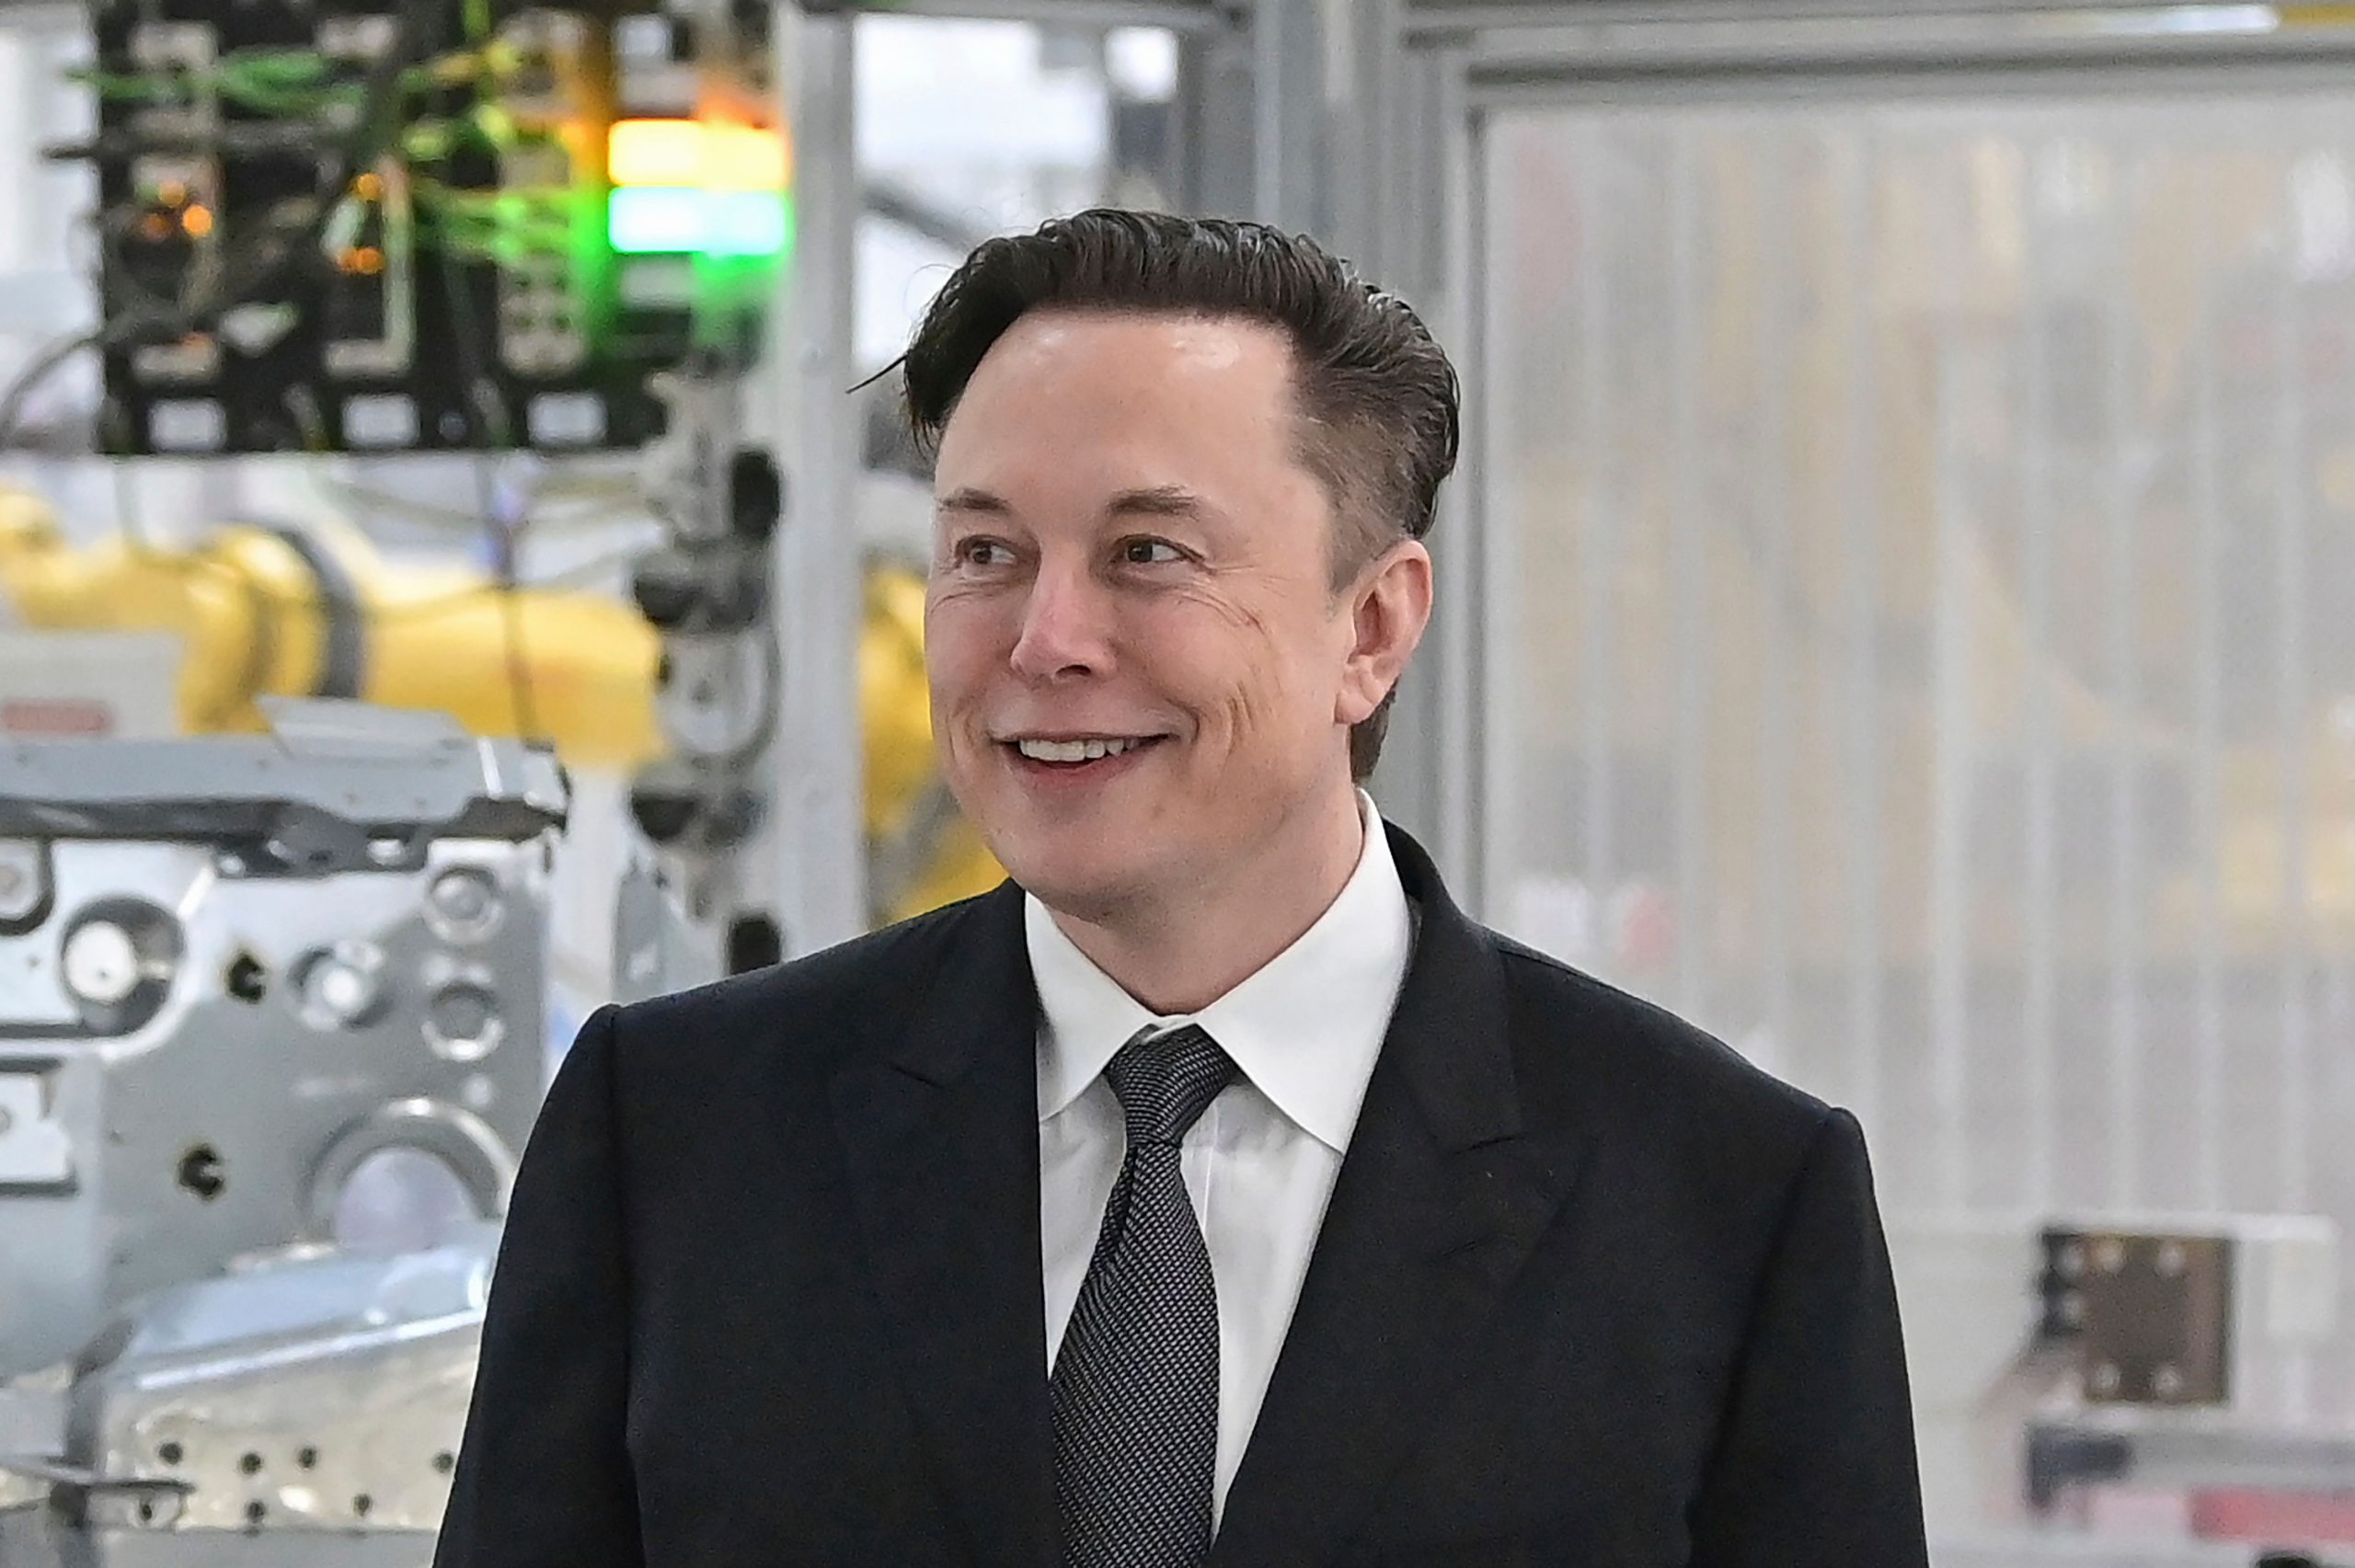 Elon Musk to open for Chris Rock comedy show: All you need to know